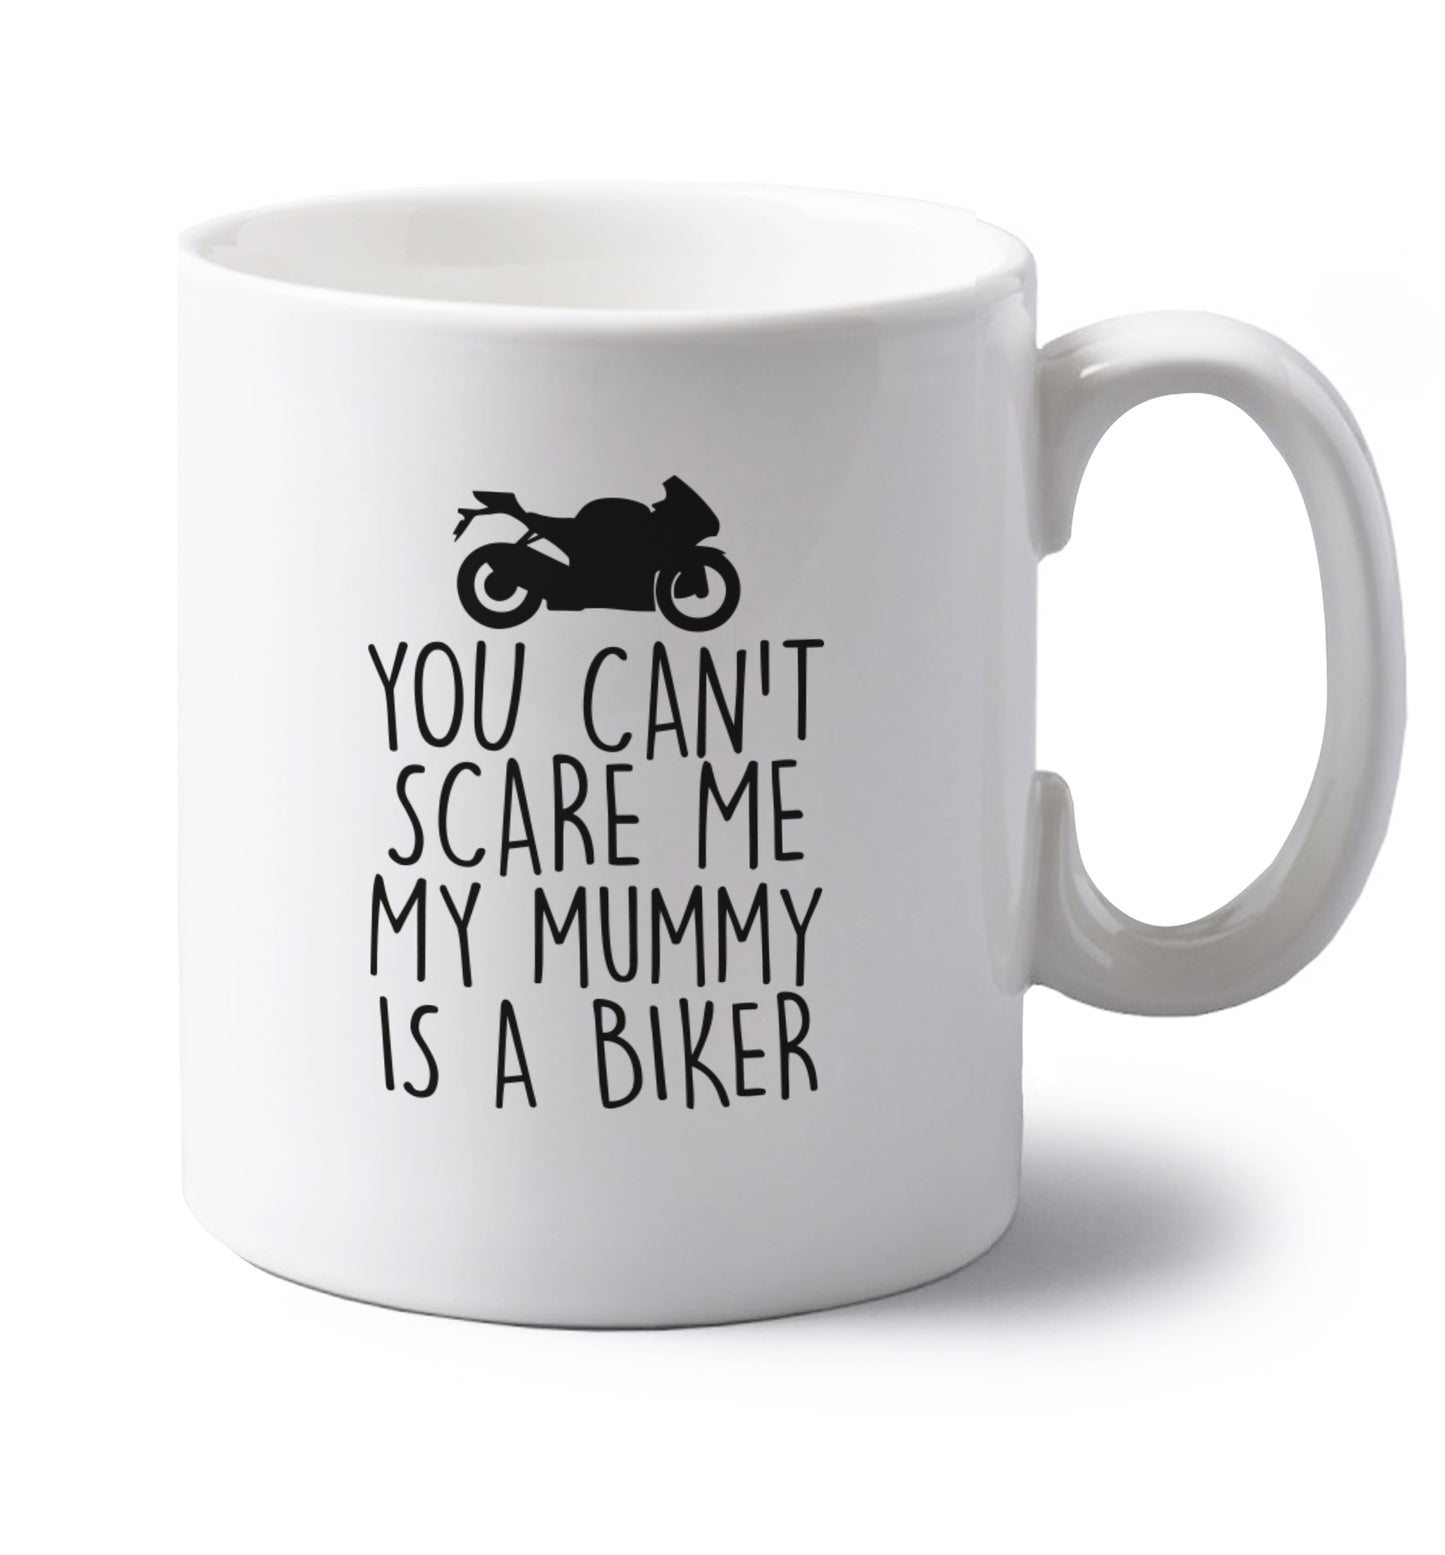 You can't scare me my mummy is a biker left handed white ceramic mug 